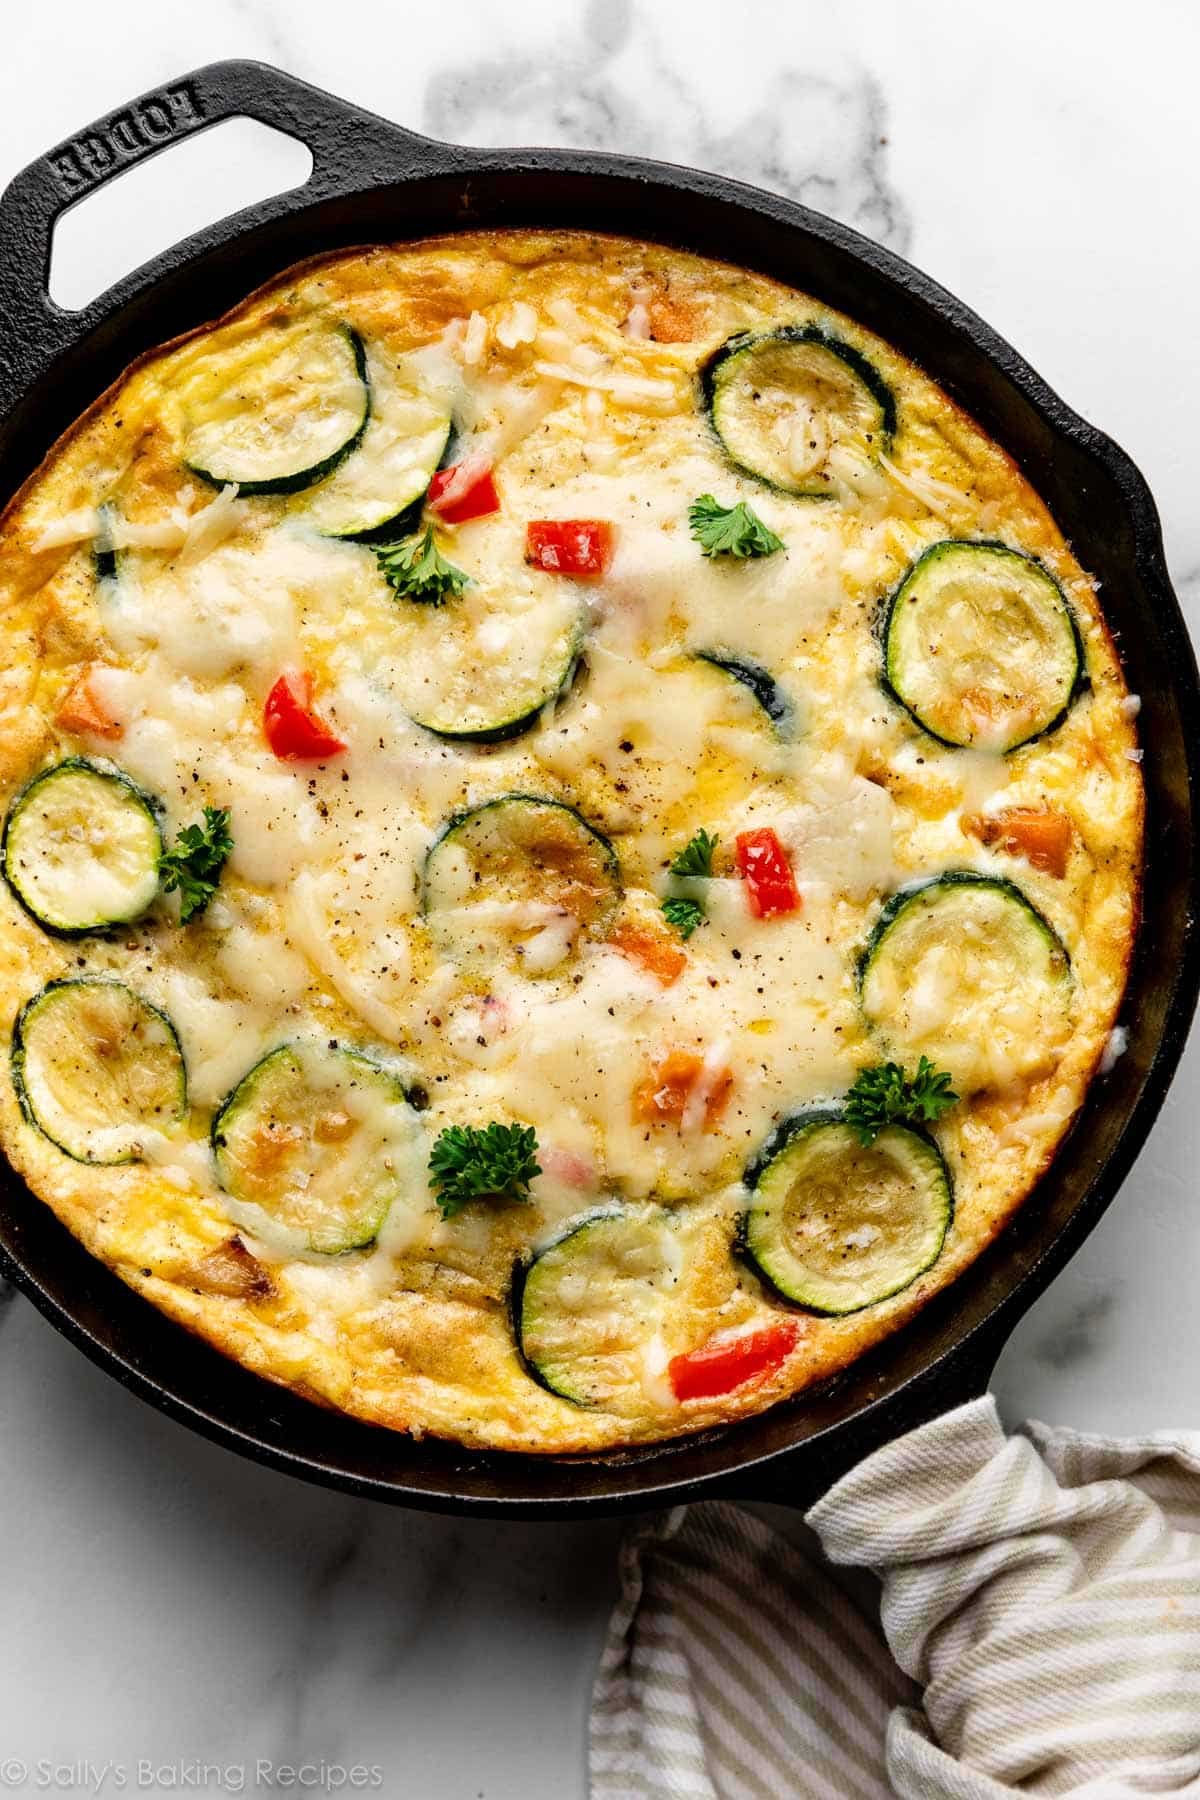 vegetable frittata with zucchini and red bell peppers in a cast iron skillet.